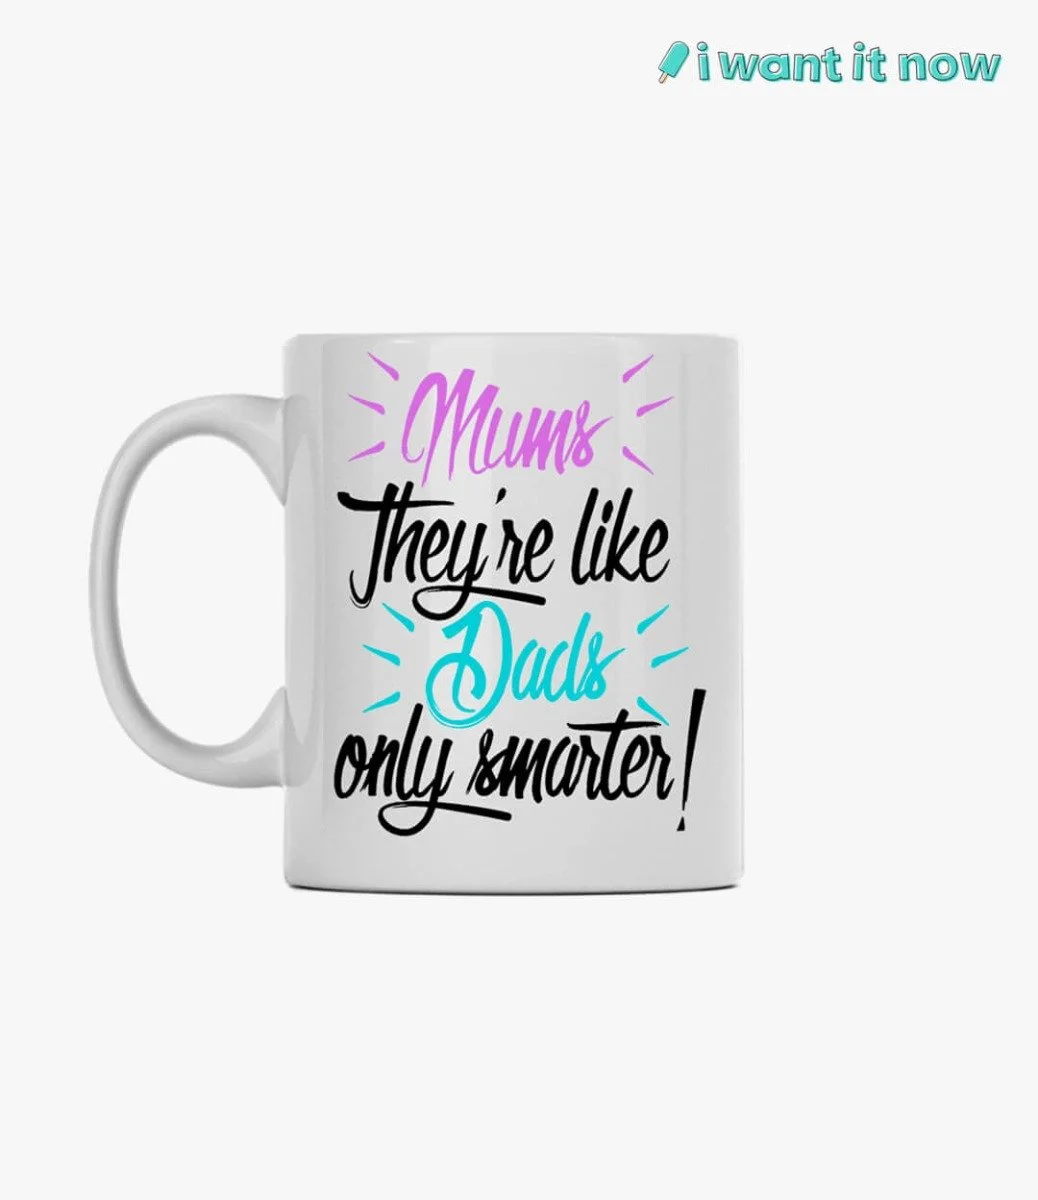 Mums they're like Dads only smarter! Mug By I Want It Now